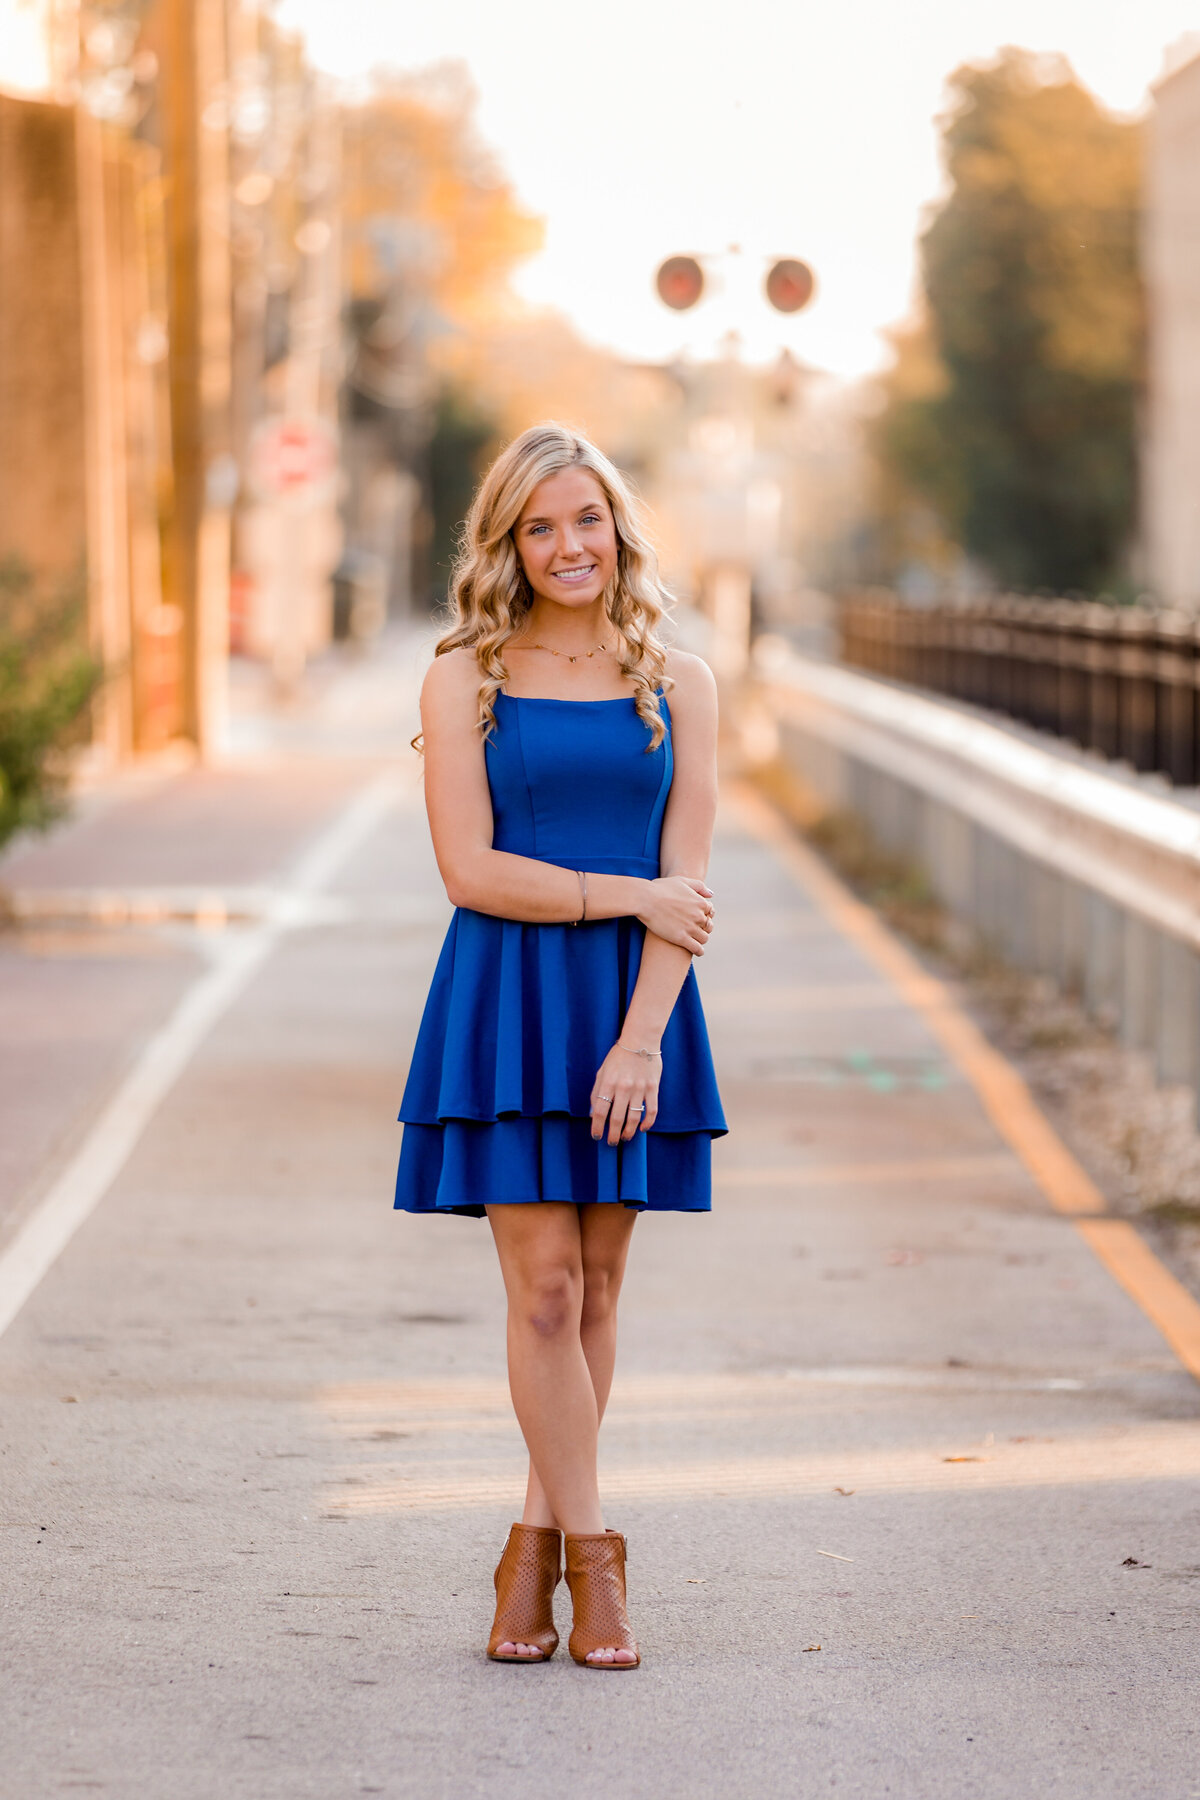 A blonde stands in an alley with her ankles crossed holding her arm for senior portraits.